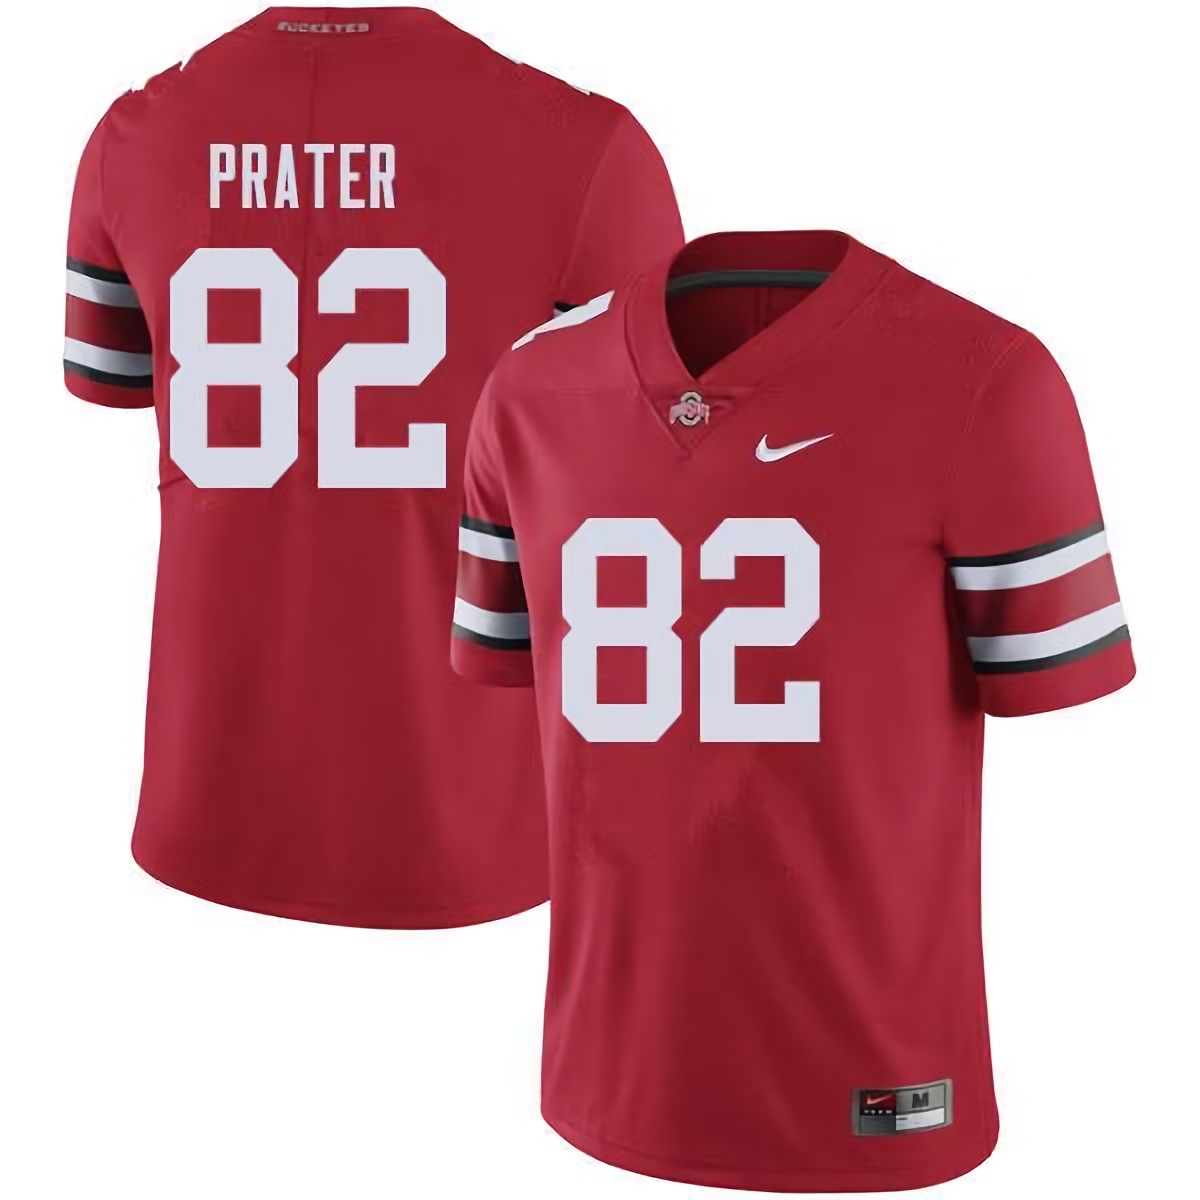 Garyn Prater Ohio State Buckeyes Men's NCAA #82 Nike Red College Stitched Football Jersey VFE4556BR